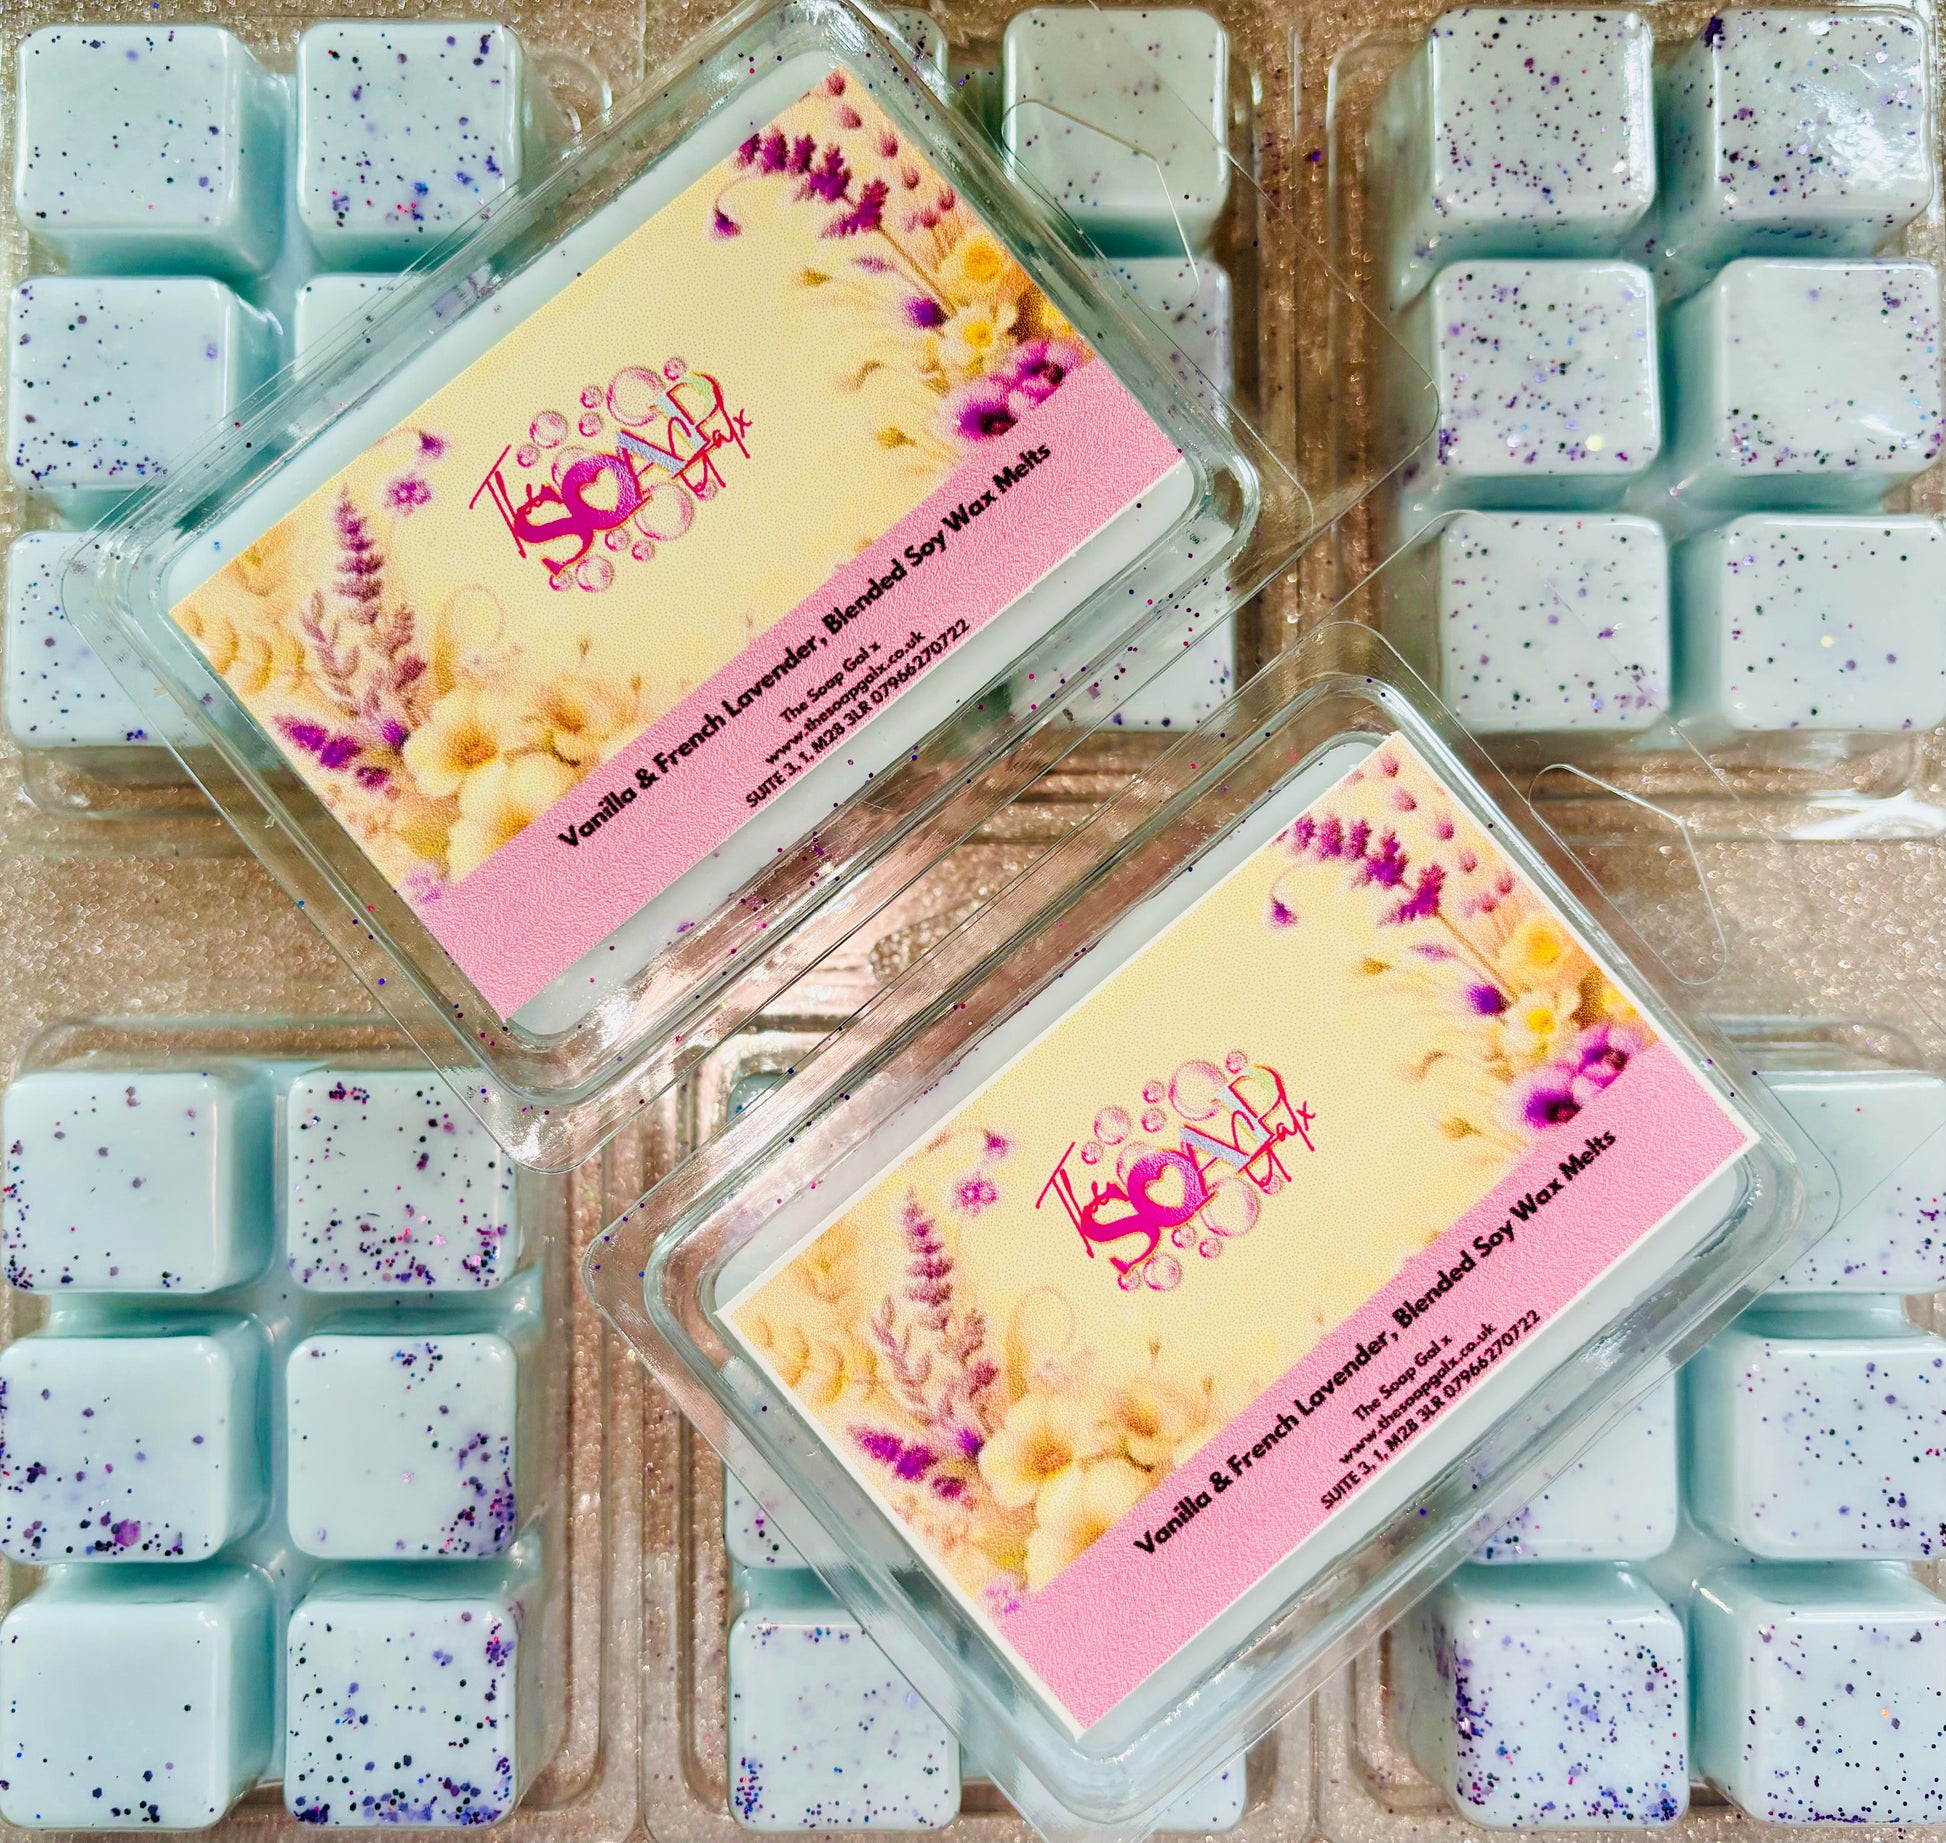 Two boxes of handmade vegan soap displayed among various other soap pieces, including The Soap Gal x Lavender and Vanilla Wax Melts.